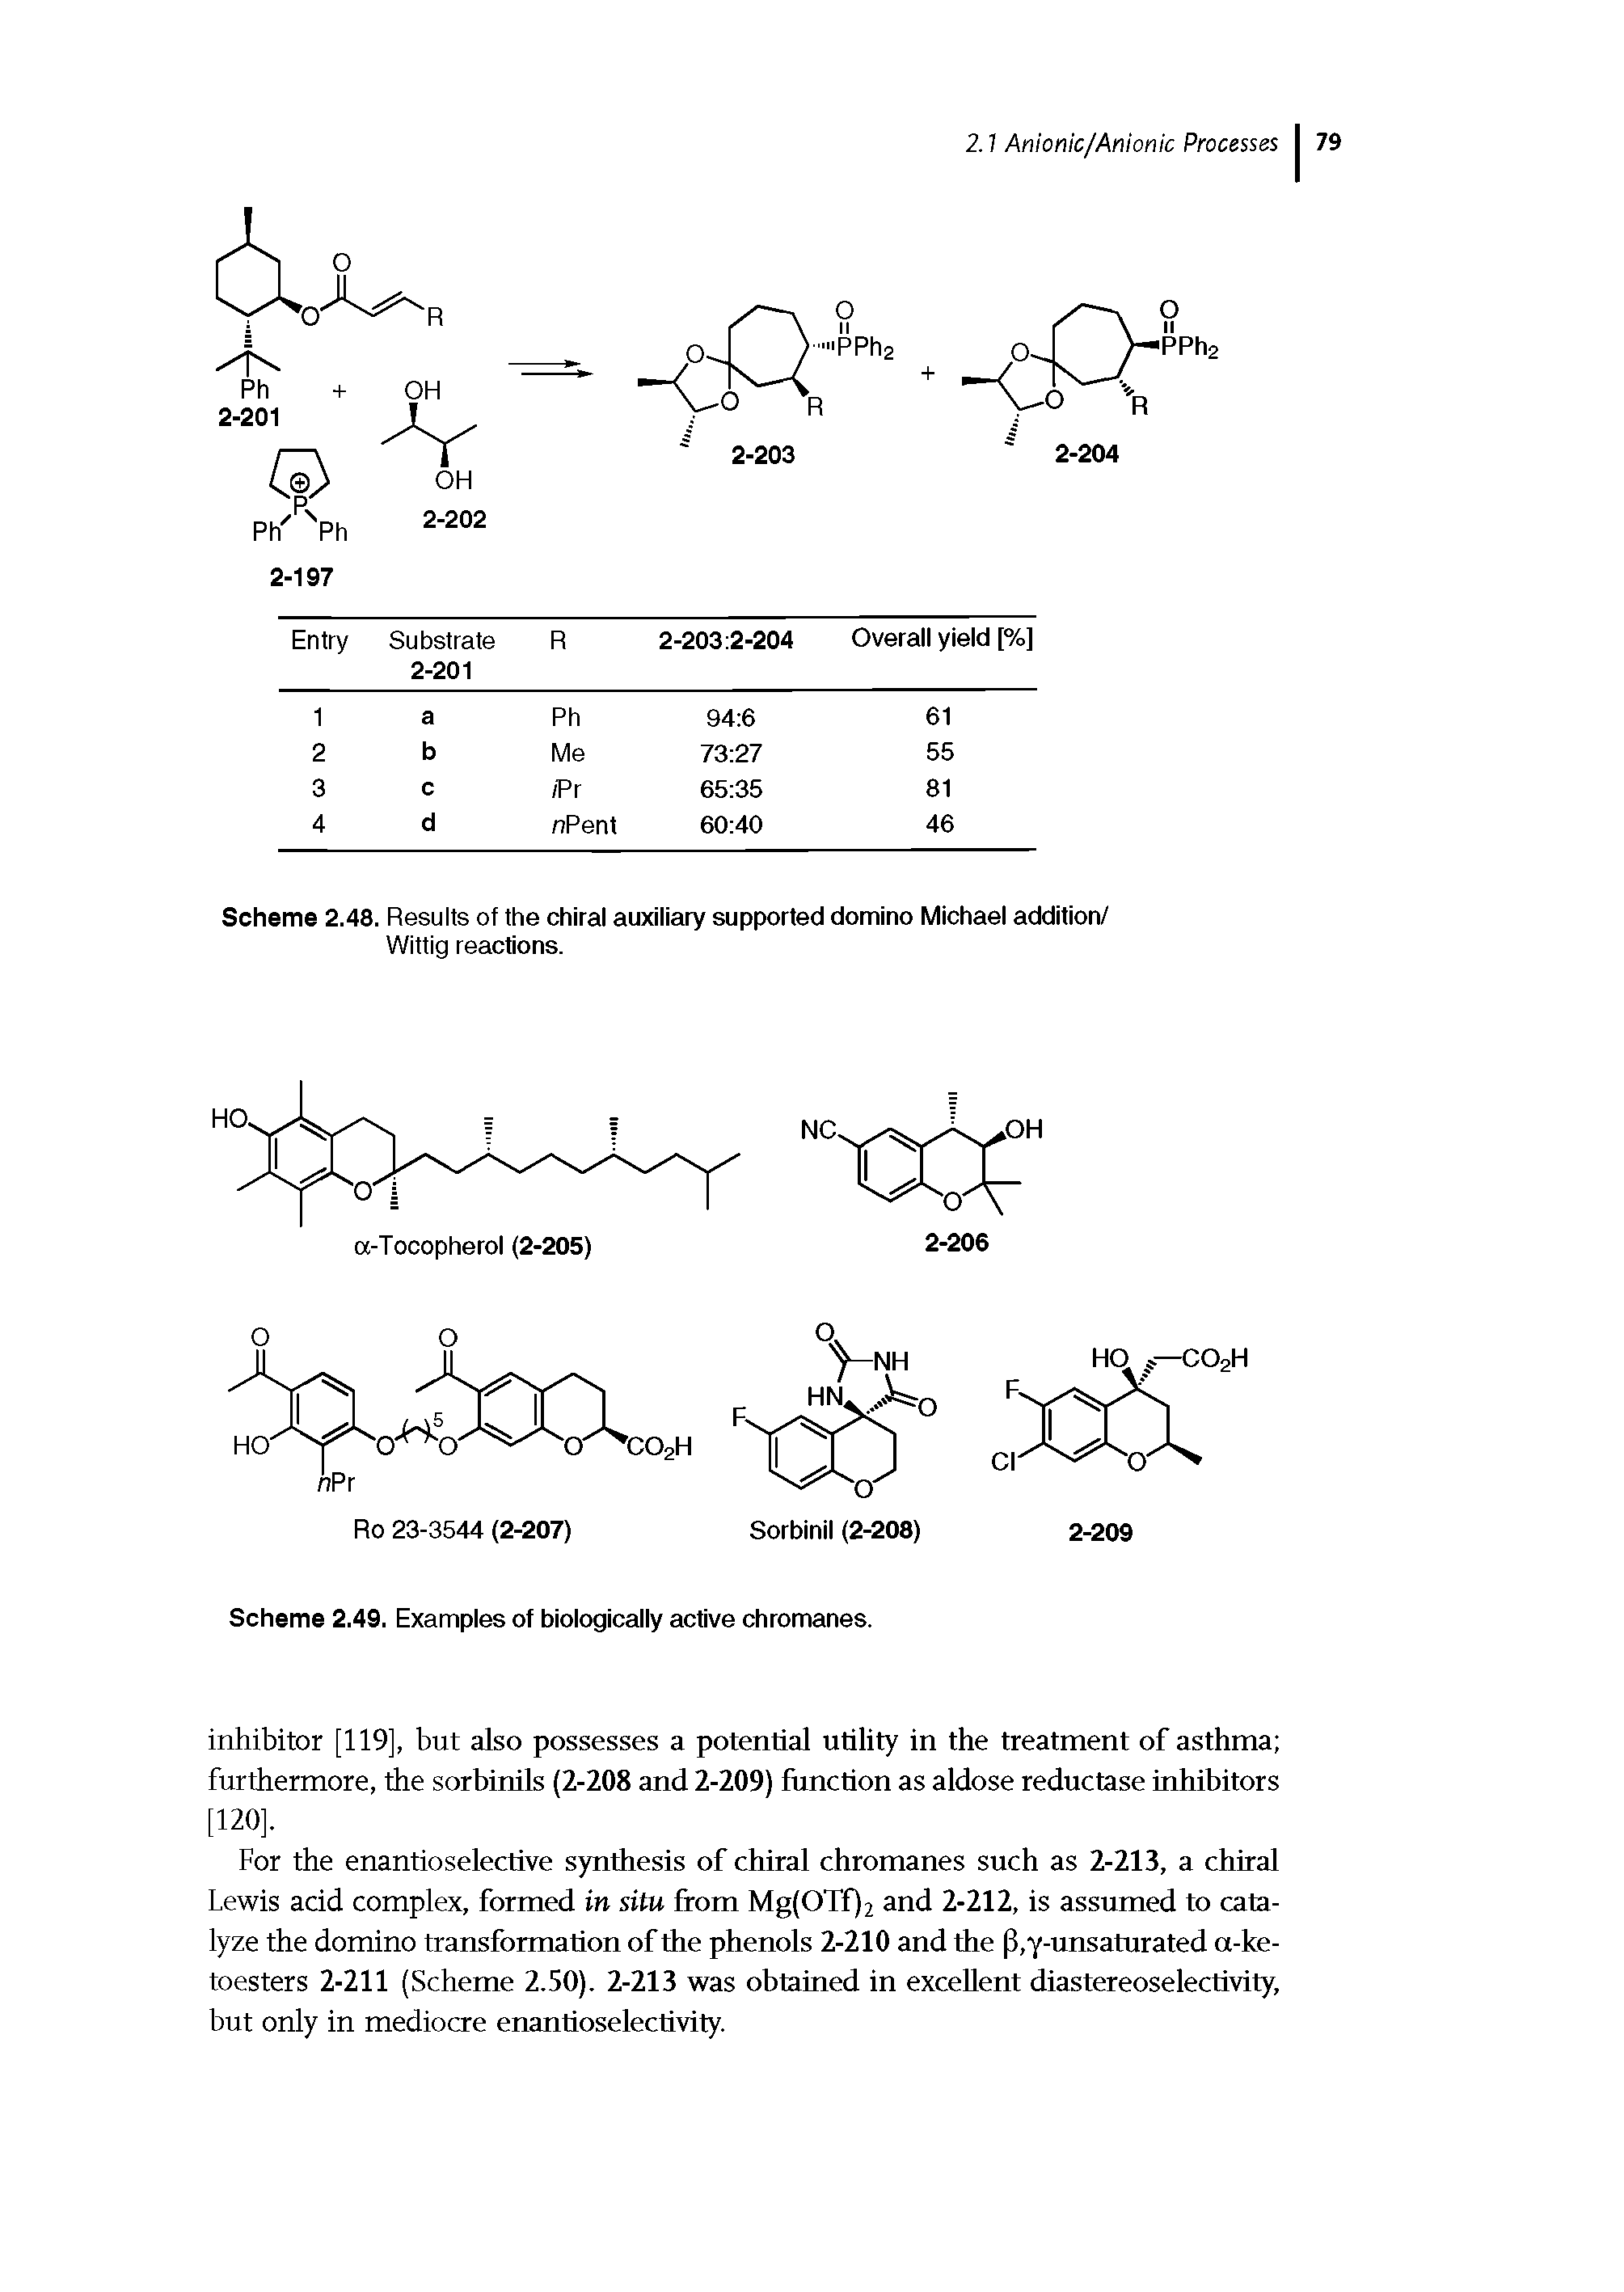 Scheme 2.48. Results of the chiral auxiliary supported domino Michael addition/ Wittig reactions.